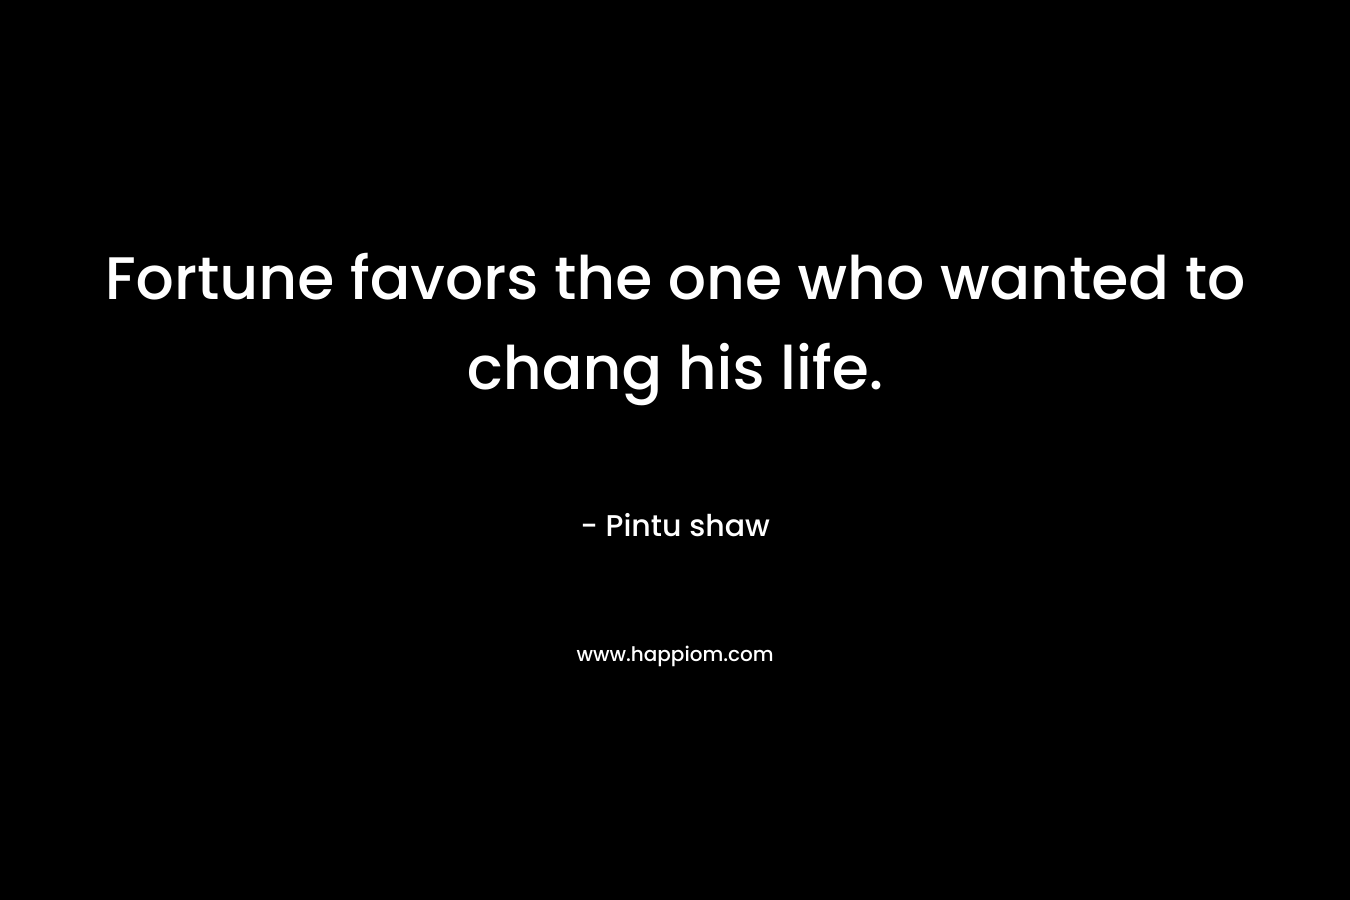 Fortune favors the one who wanted to chang his life.